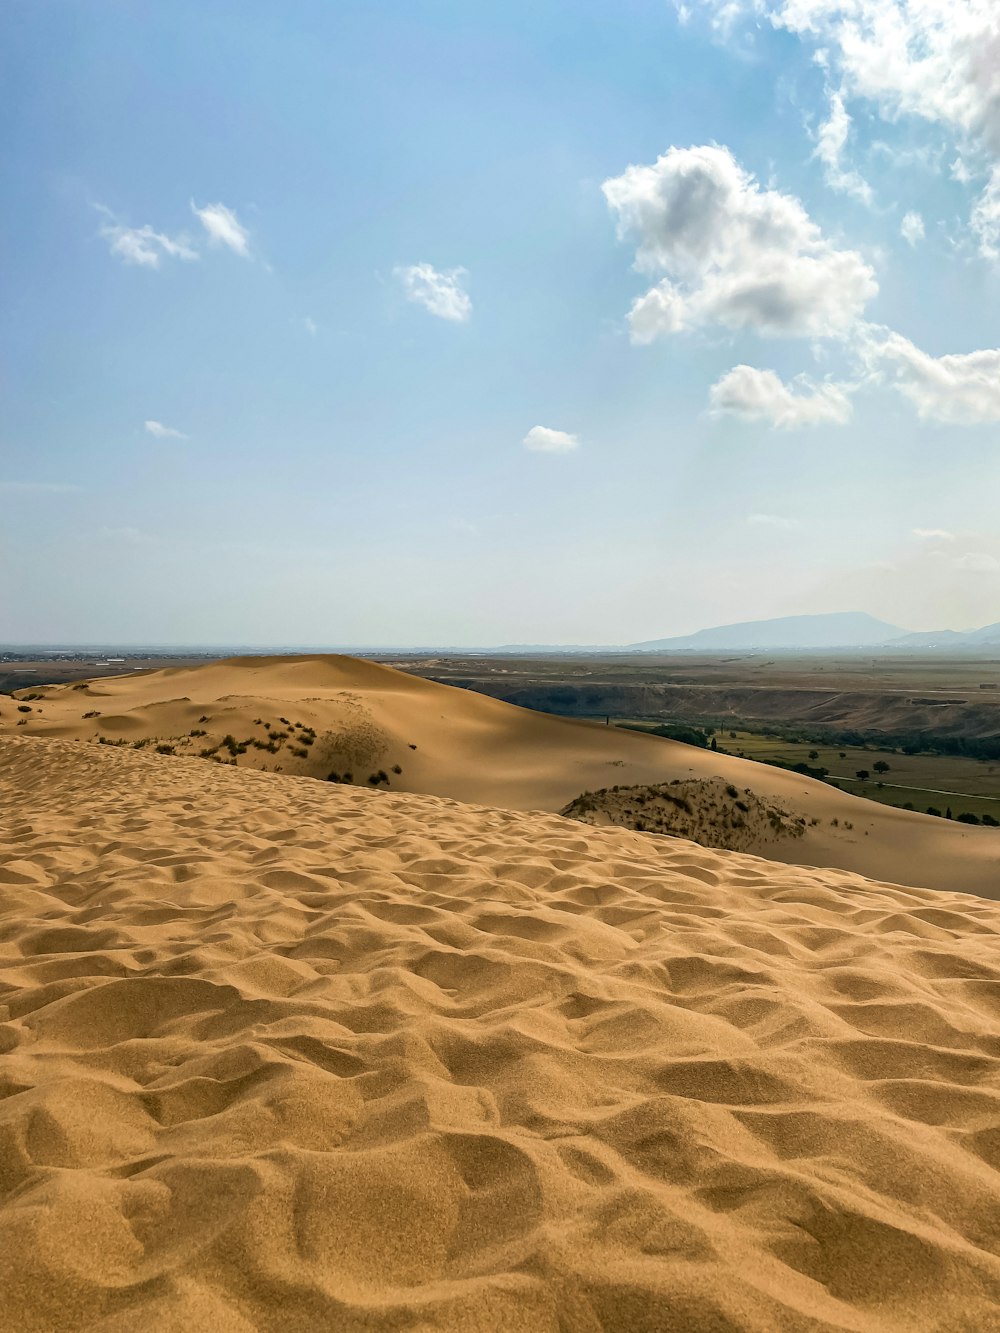 a view of the desert from a sand dune